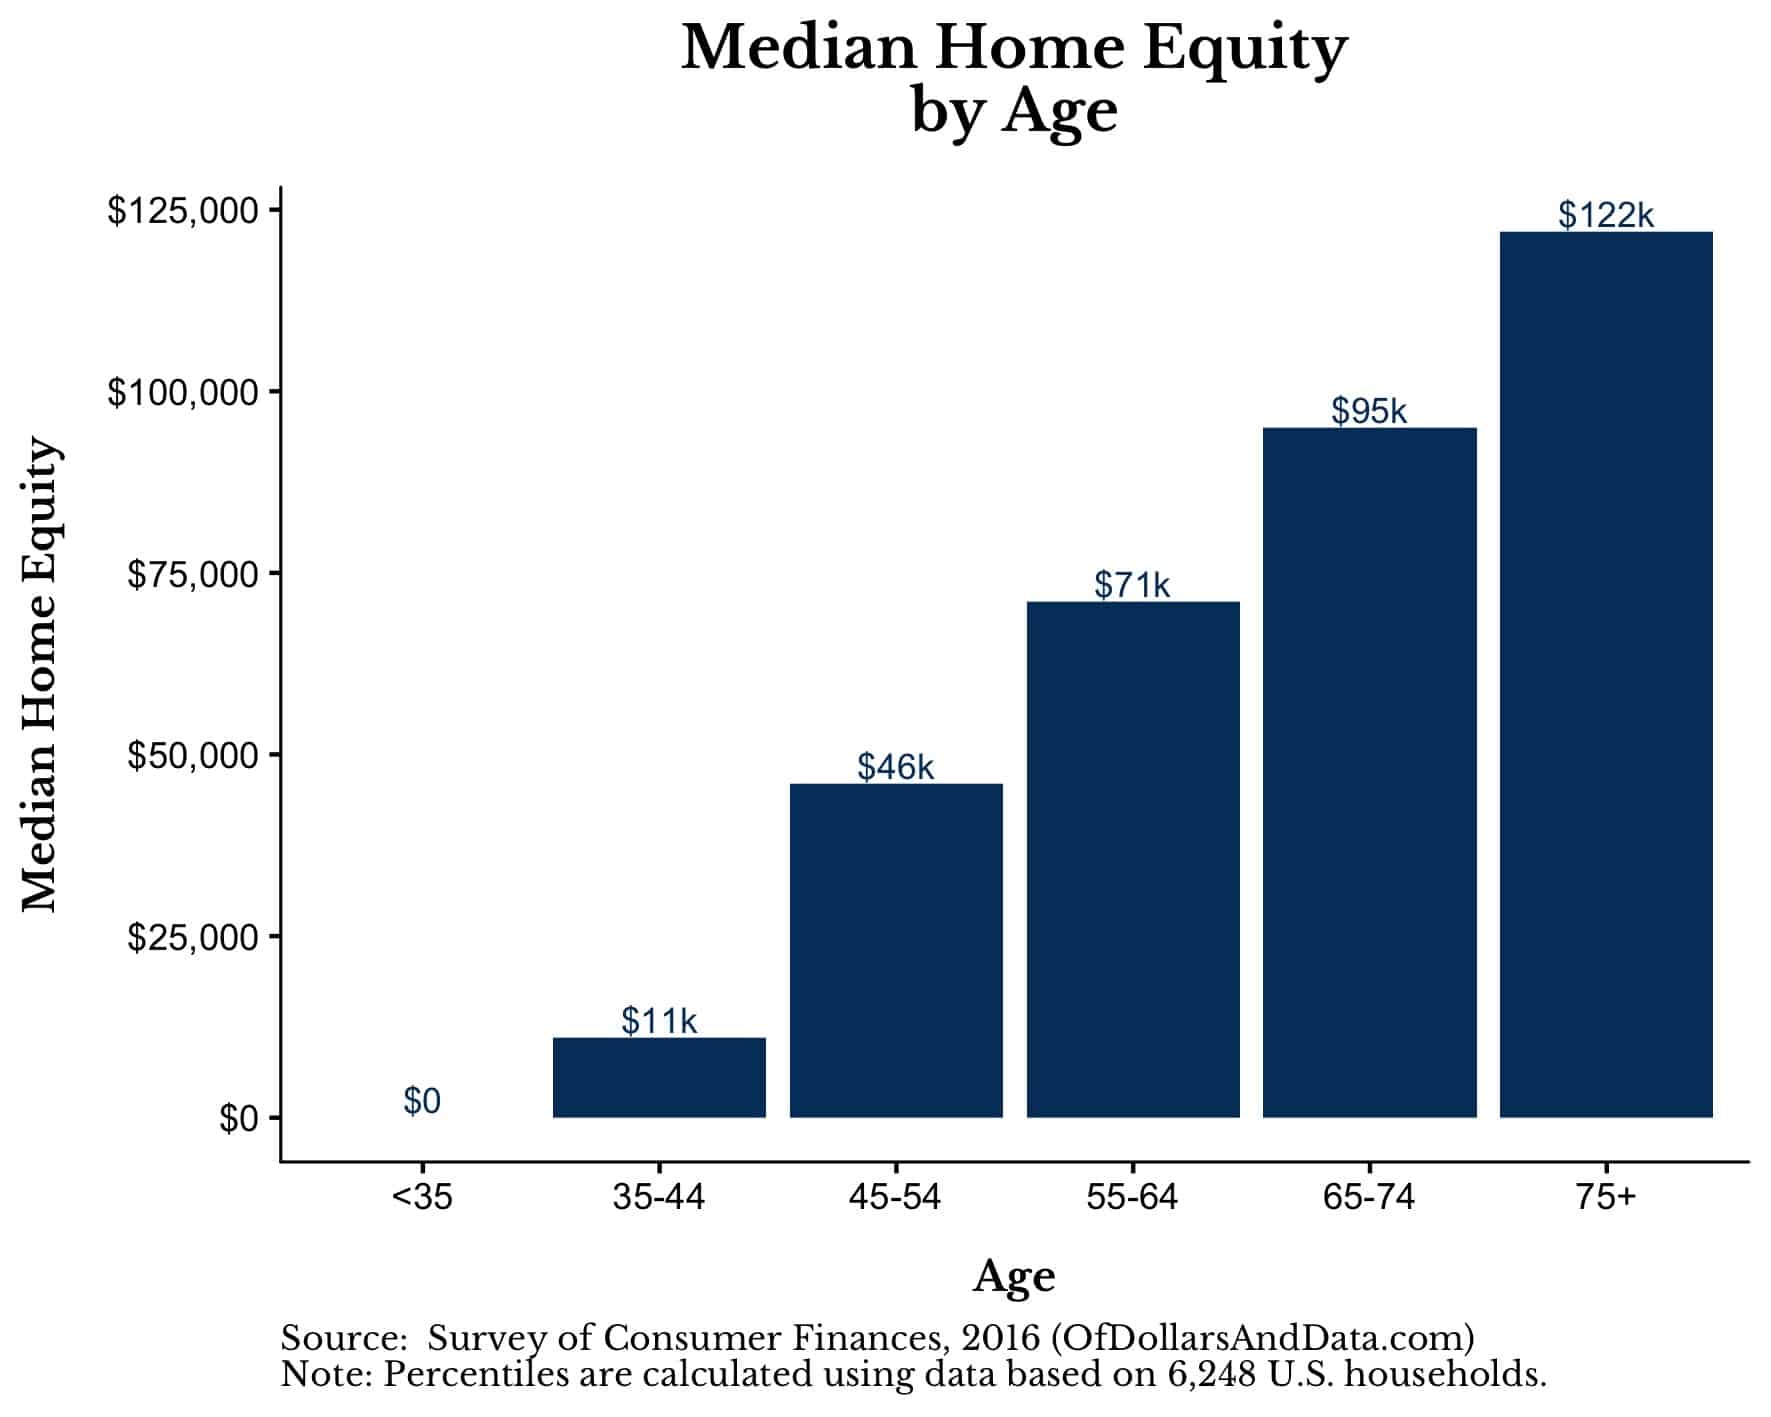 Median home equity by age, 2016 Survey of Consumer Finances